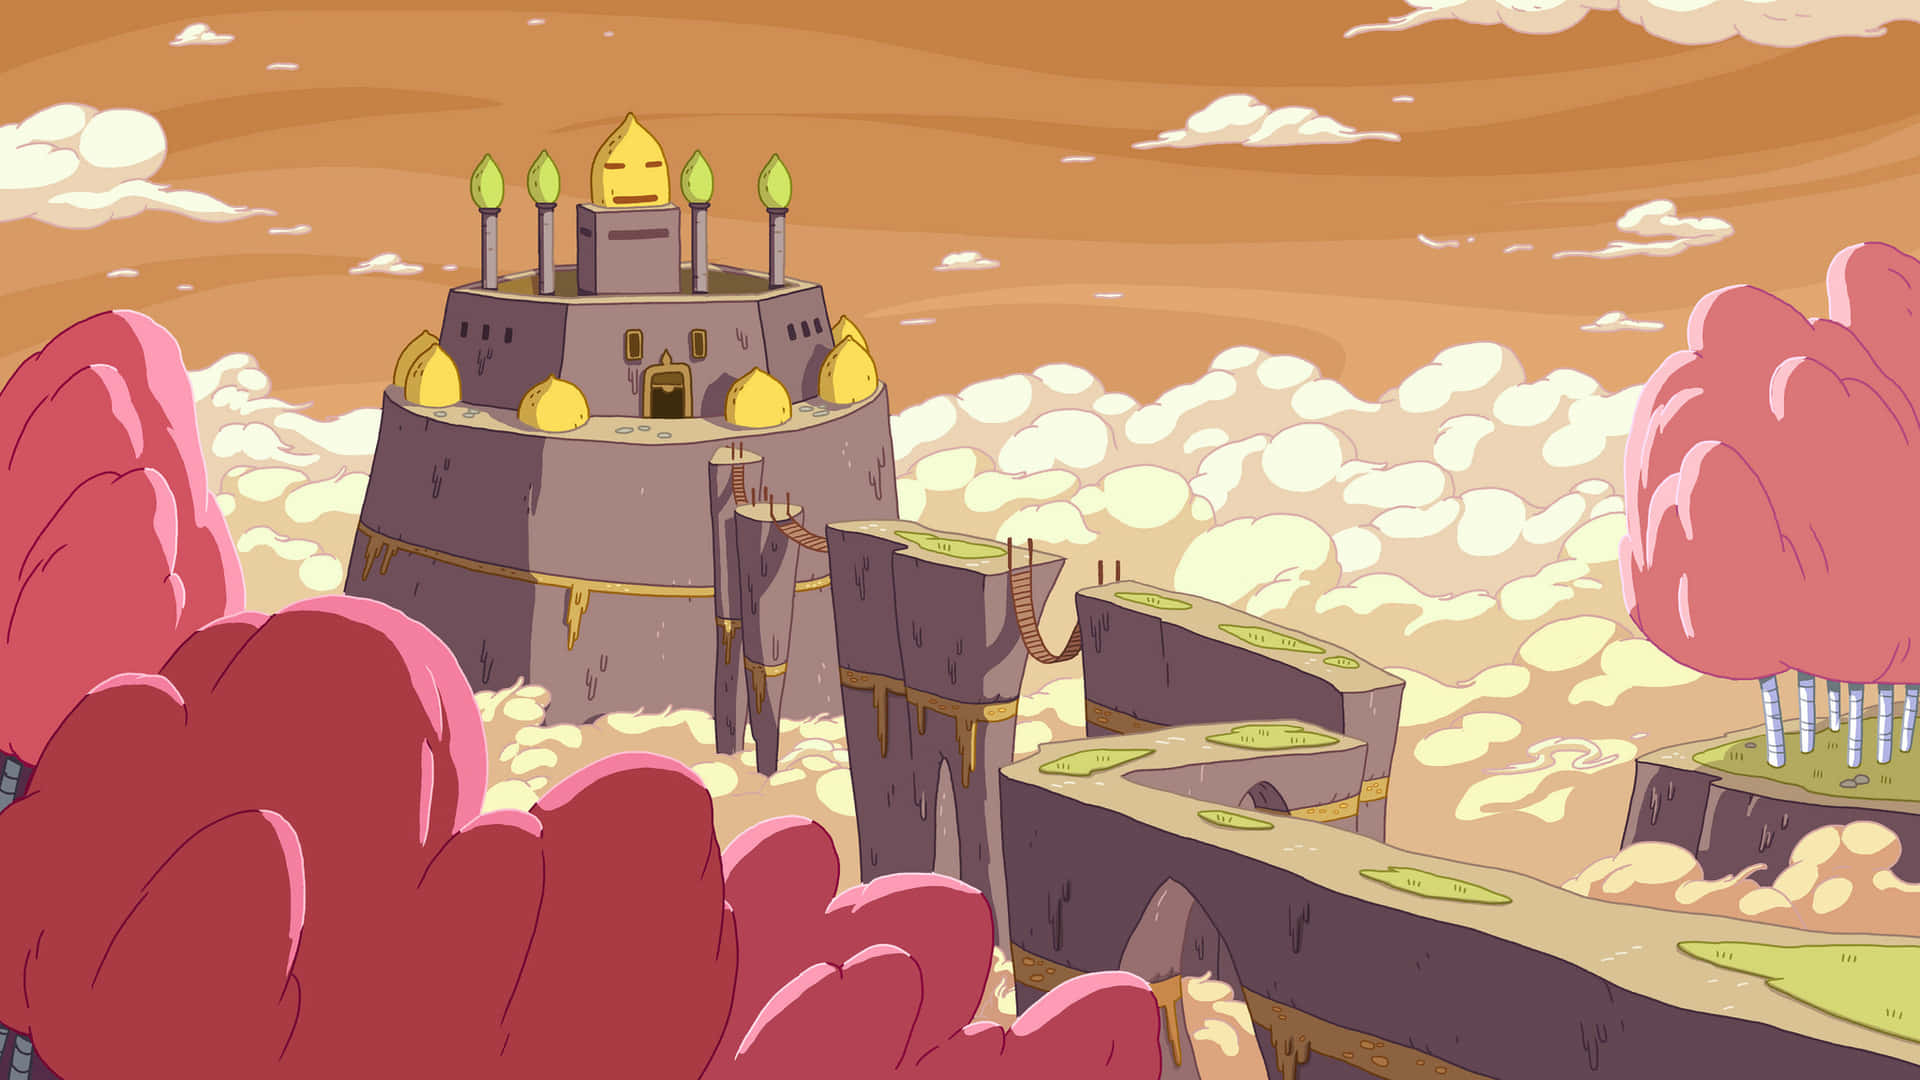 A peaceful and majestic kingdom view